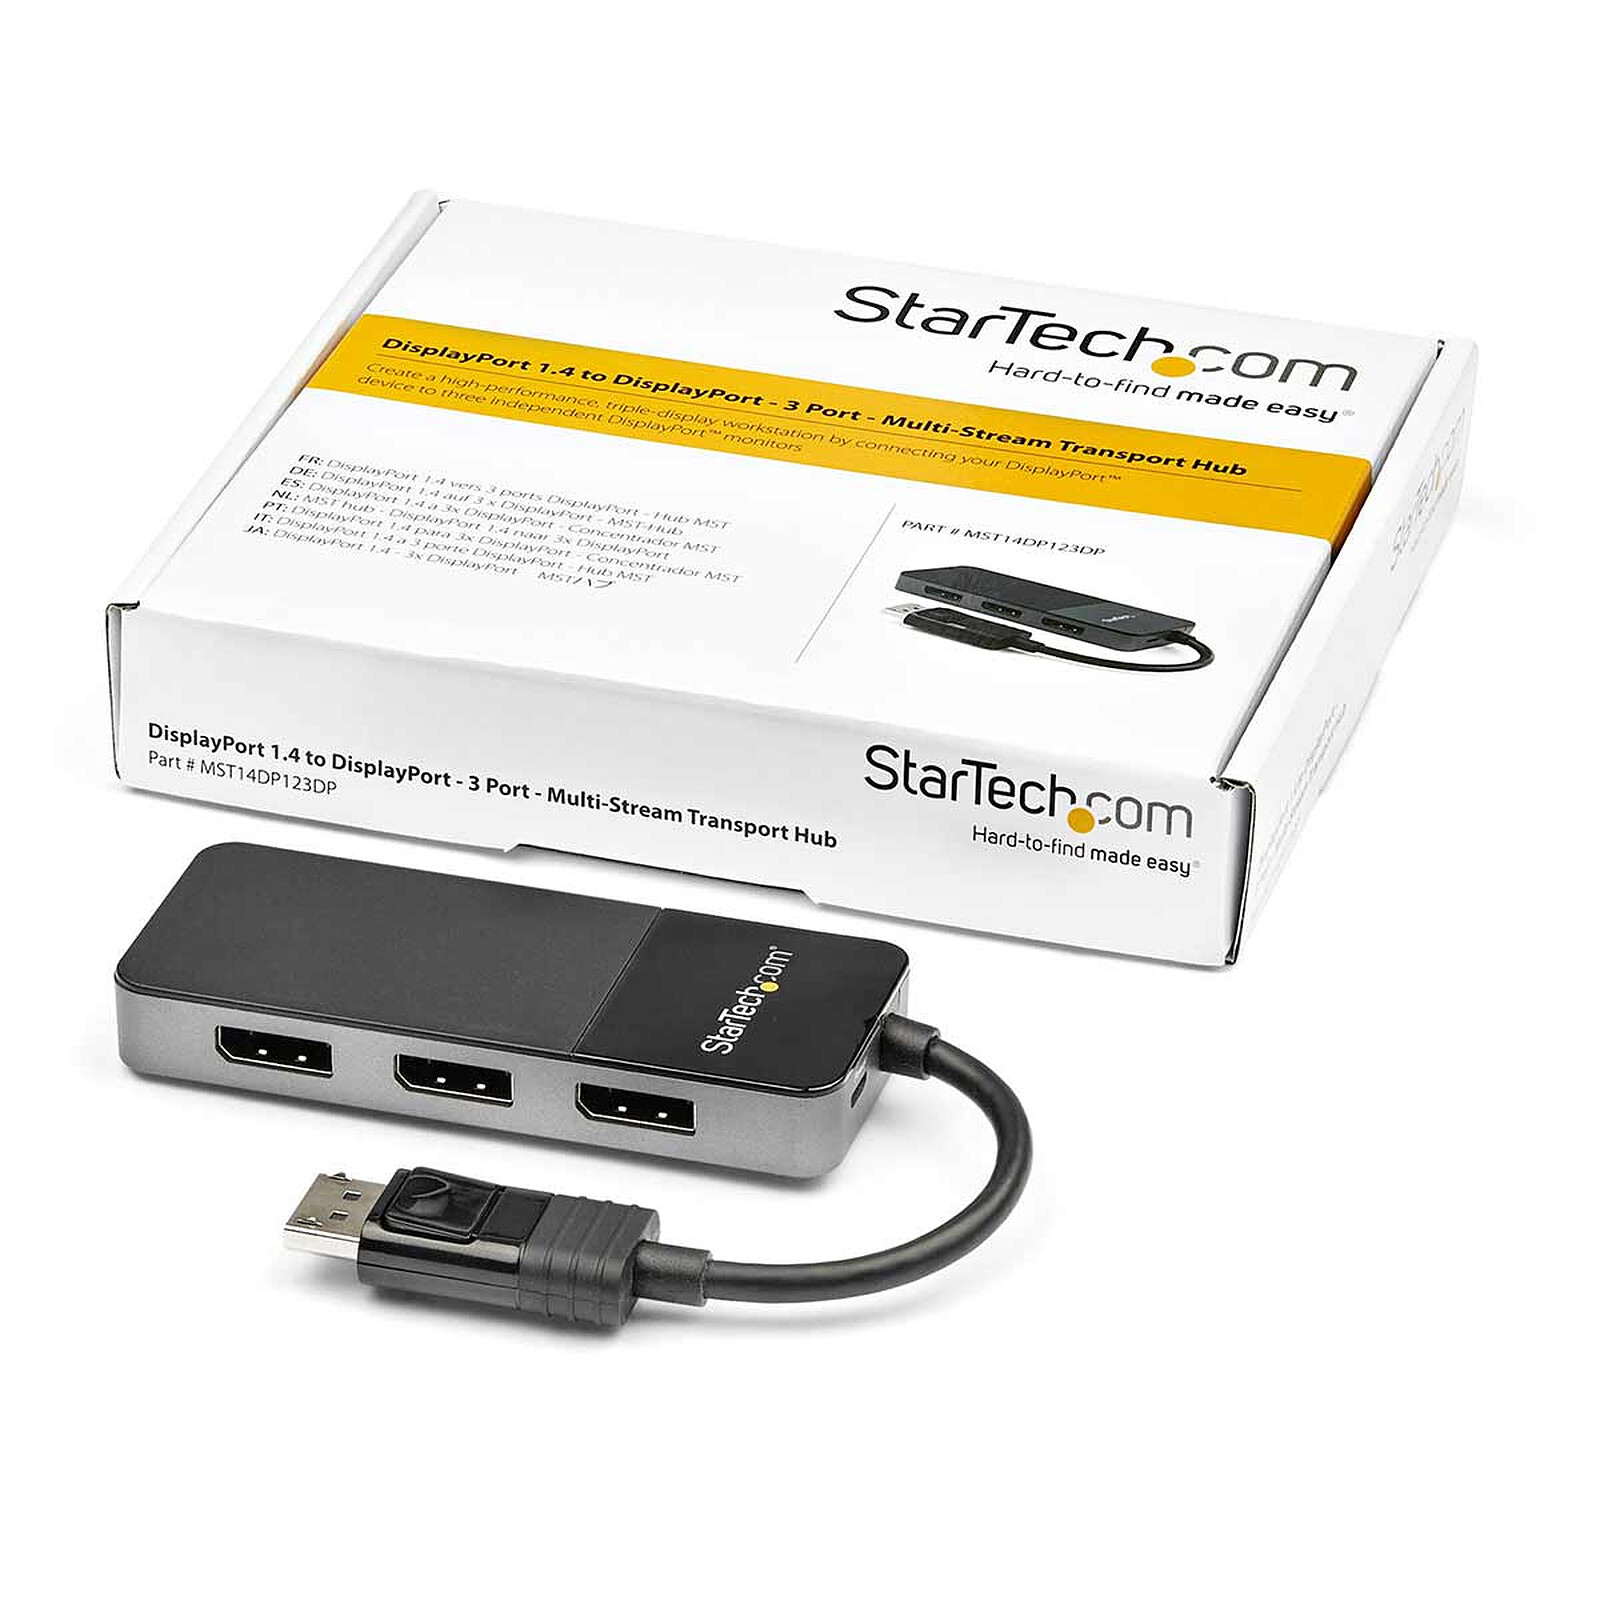 StarTech.com 4K HDMI Splitter 1 In 2 Out - 4K 30Hz HDMI 1.4 2 Port Video  Splitter Box -with high speed HDMI cable, USB power cable - Black